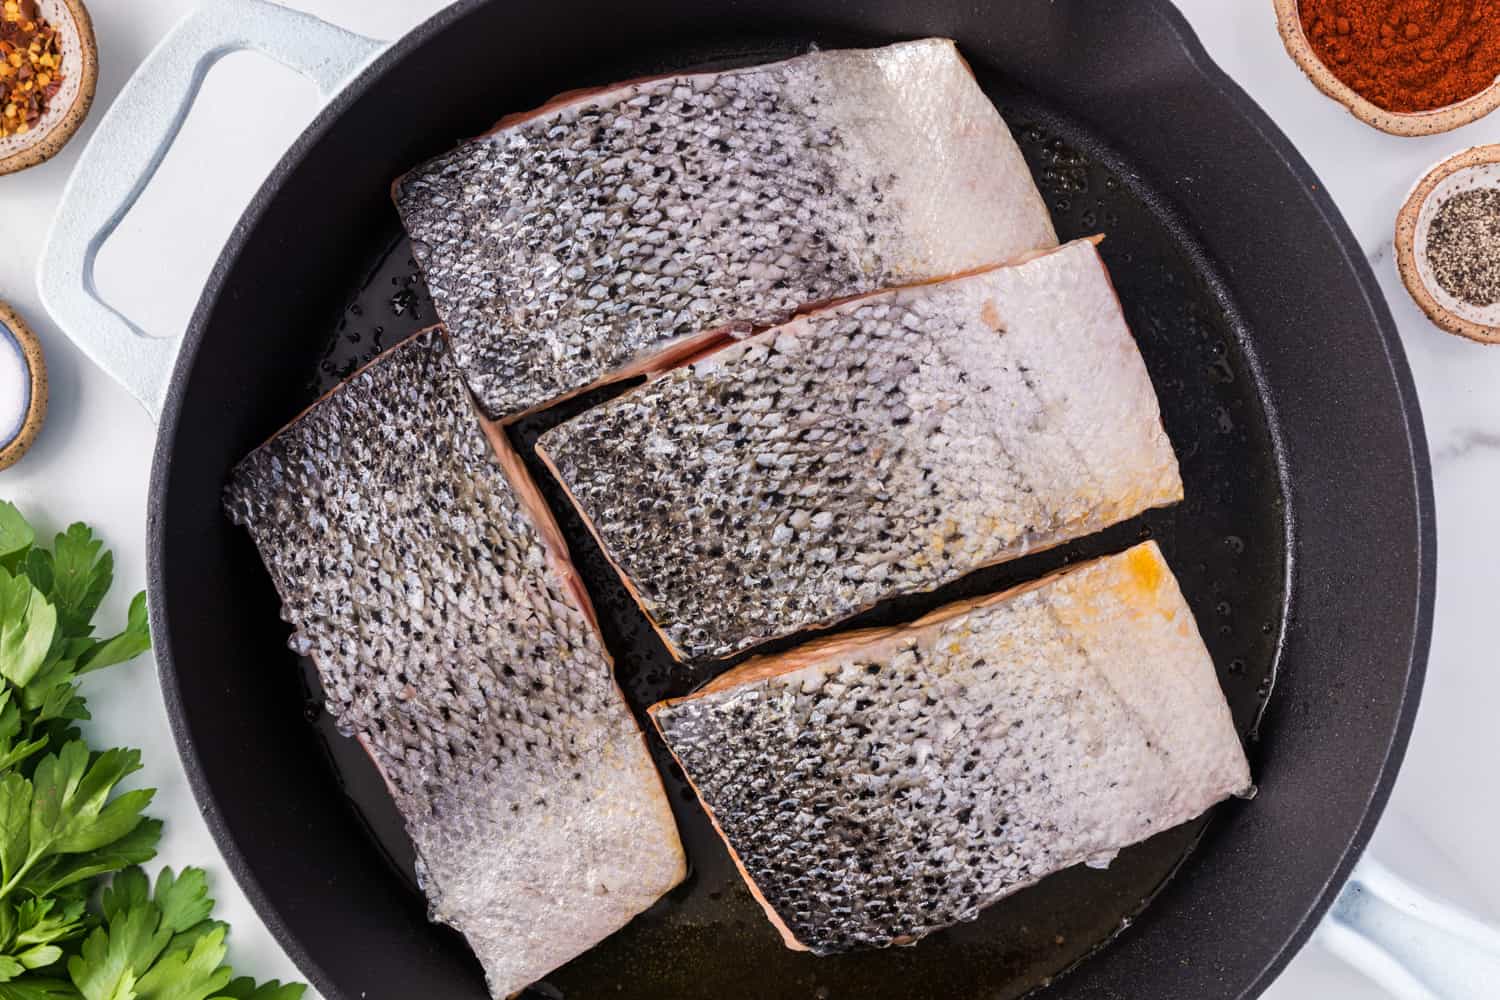 Salmon fillets face down in a frying pan.